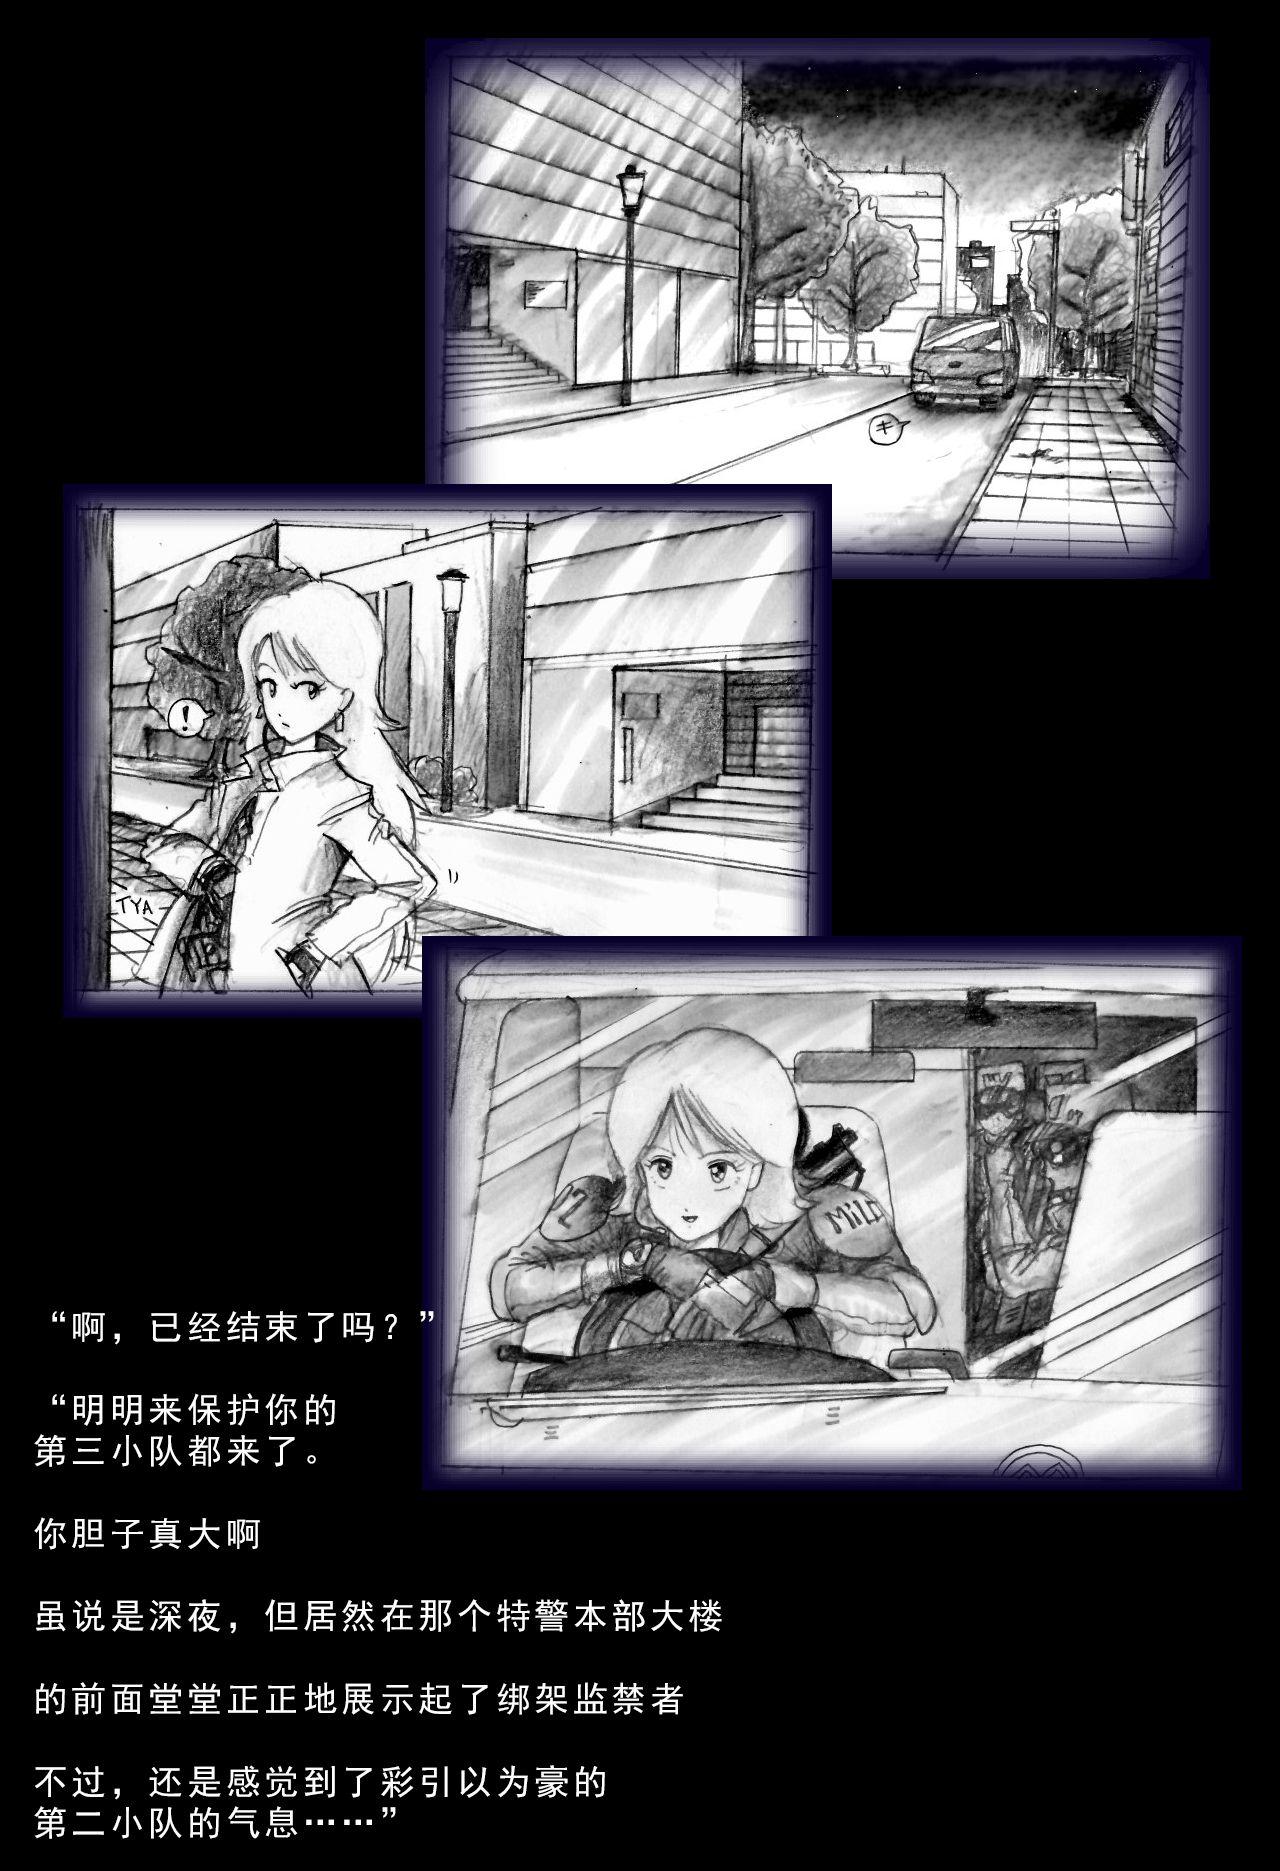 Special Police Third Platoon Captain Abduction Restraint Edition【chinese】 40